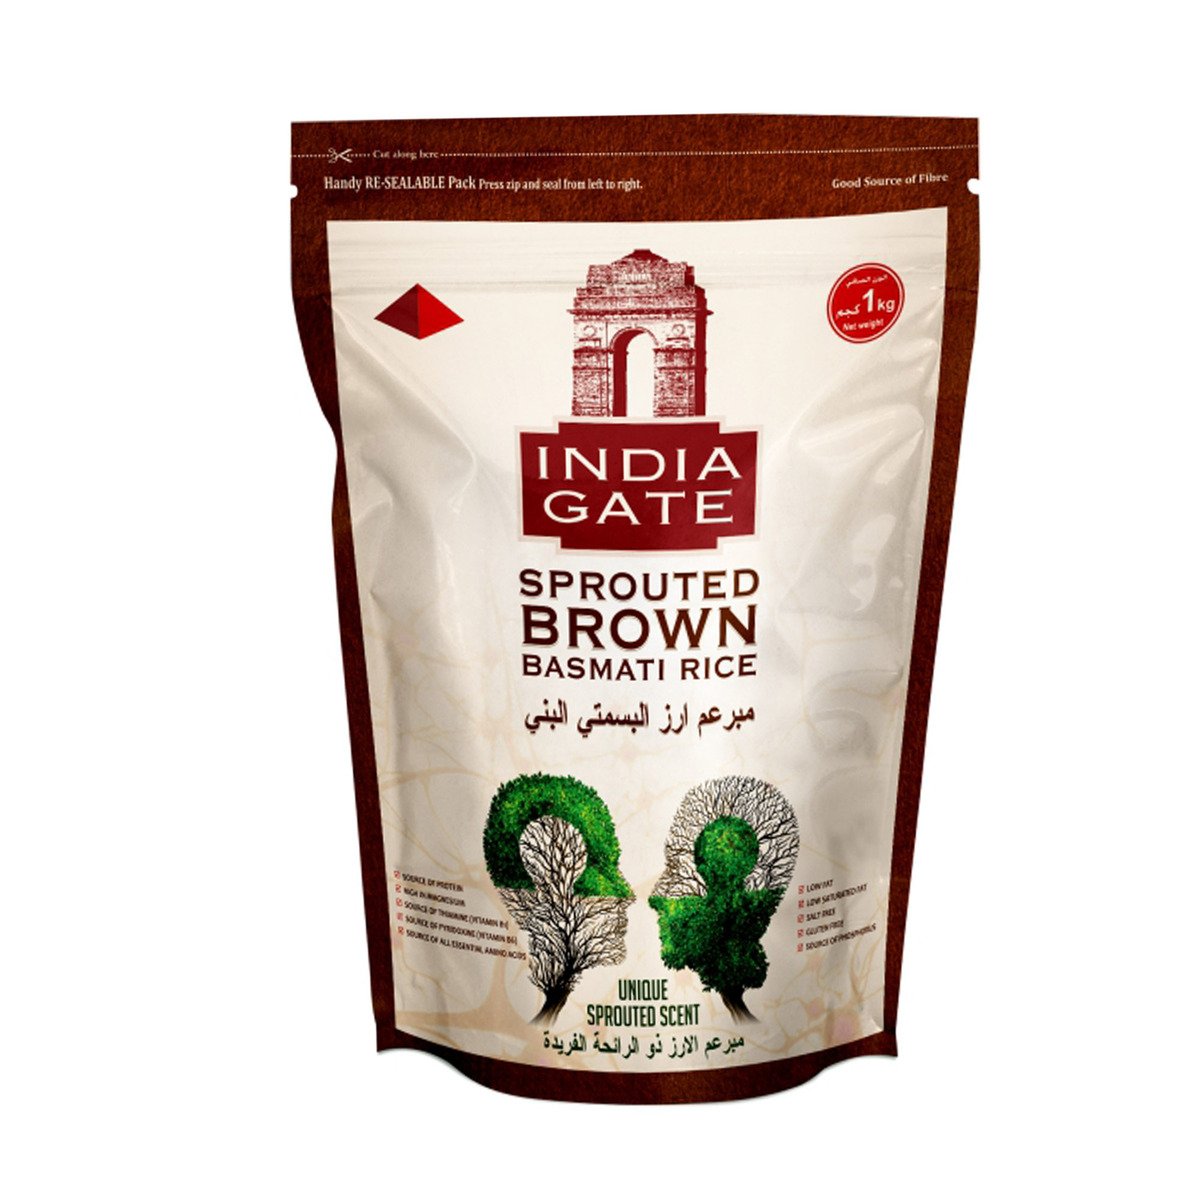 India Gate Sprouted Brown Basmati Rice 1 kg